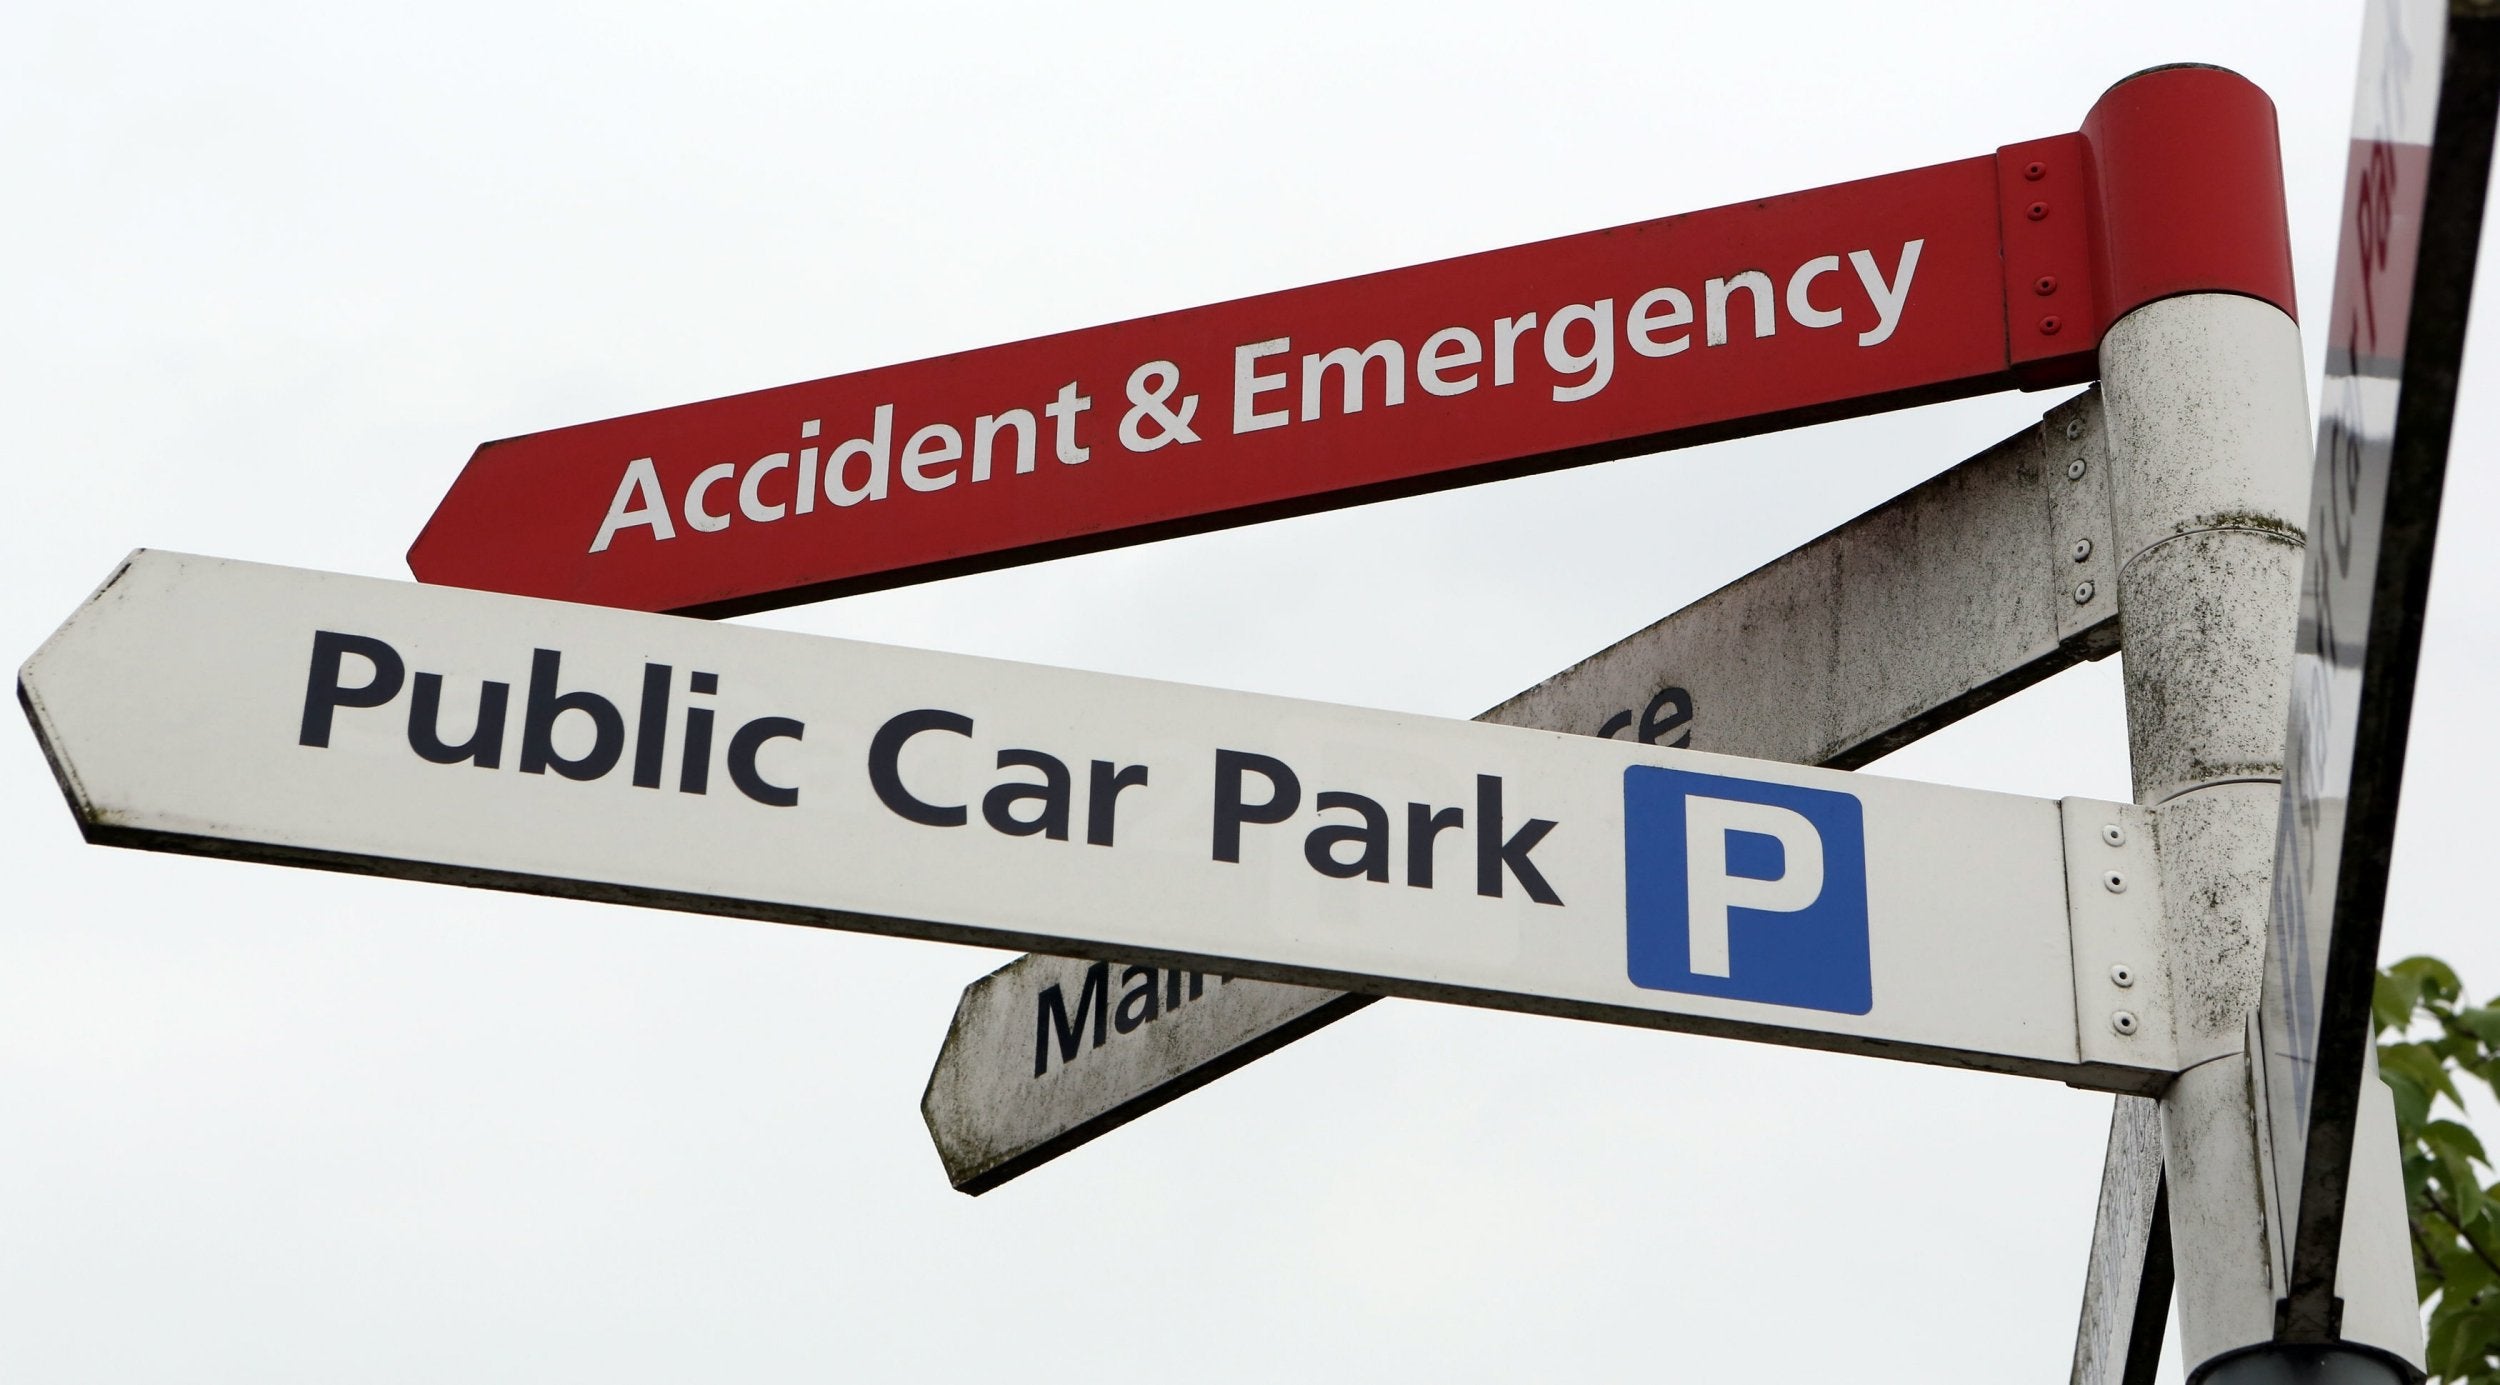 More than four in 10 NHS hospitals have increased their prices for car parking in the last year, an investigation has found